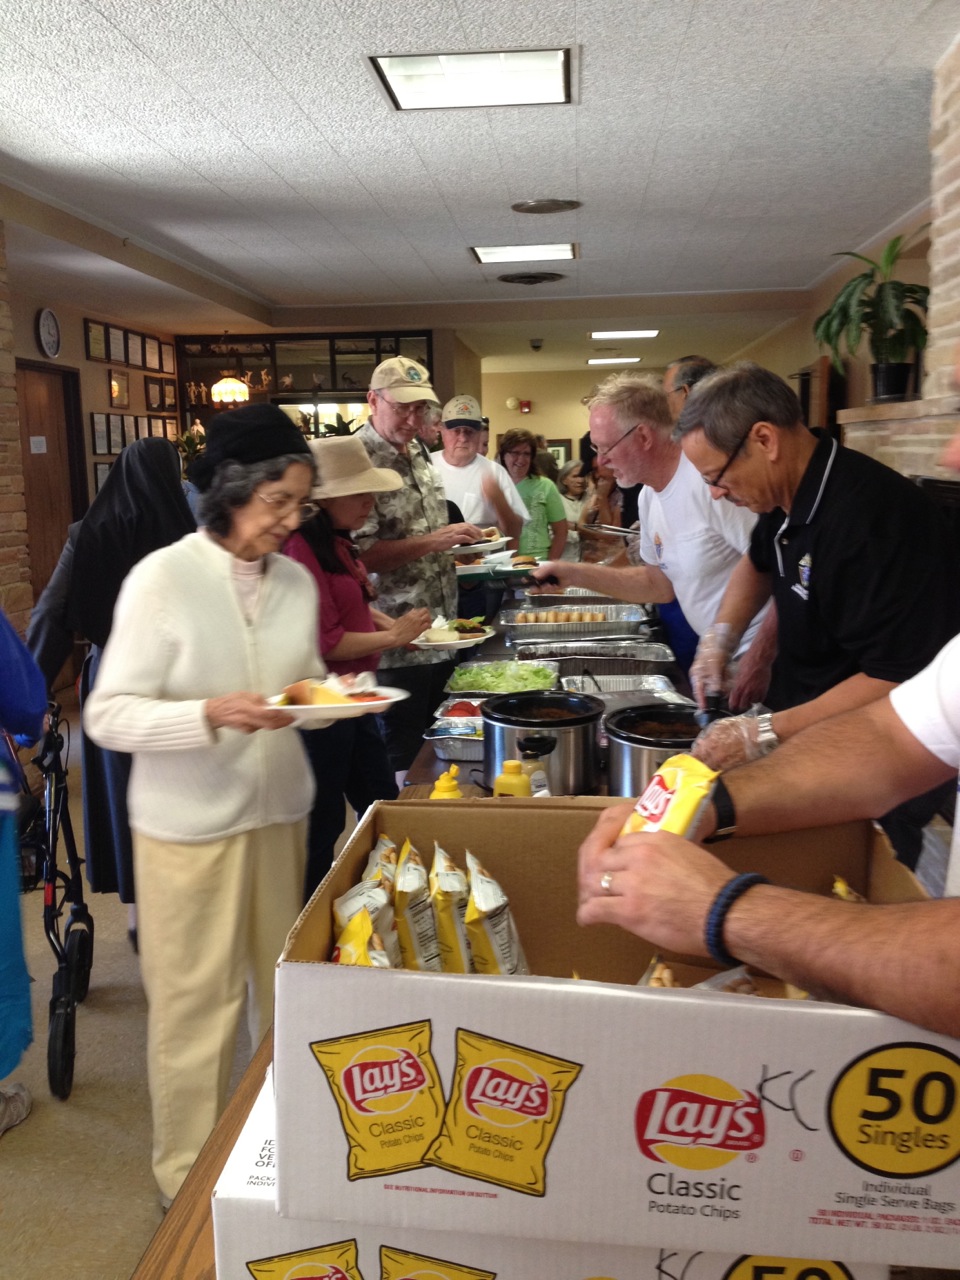 St. Joseph's residents being served lunch